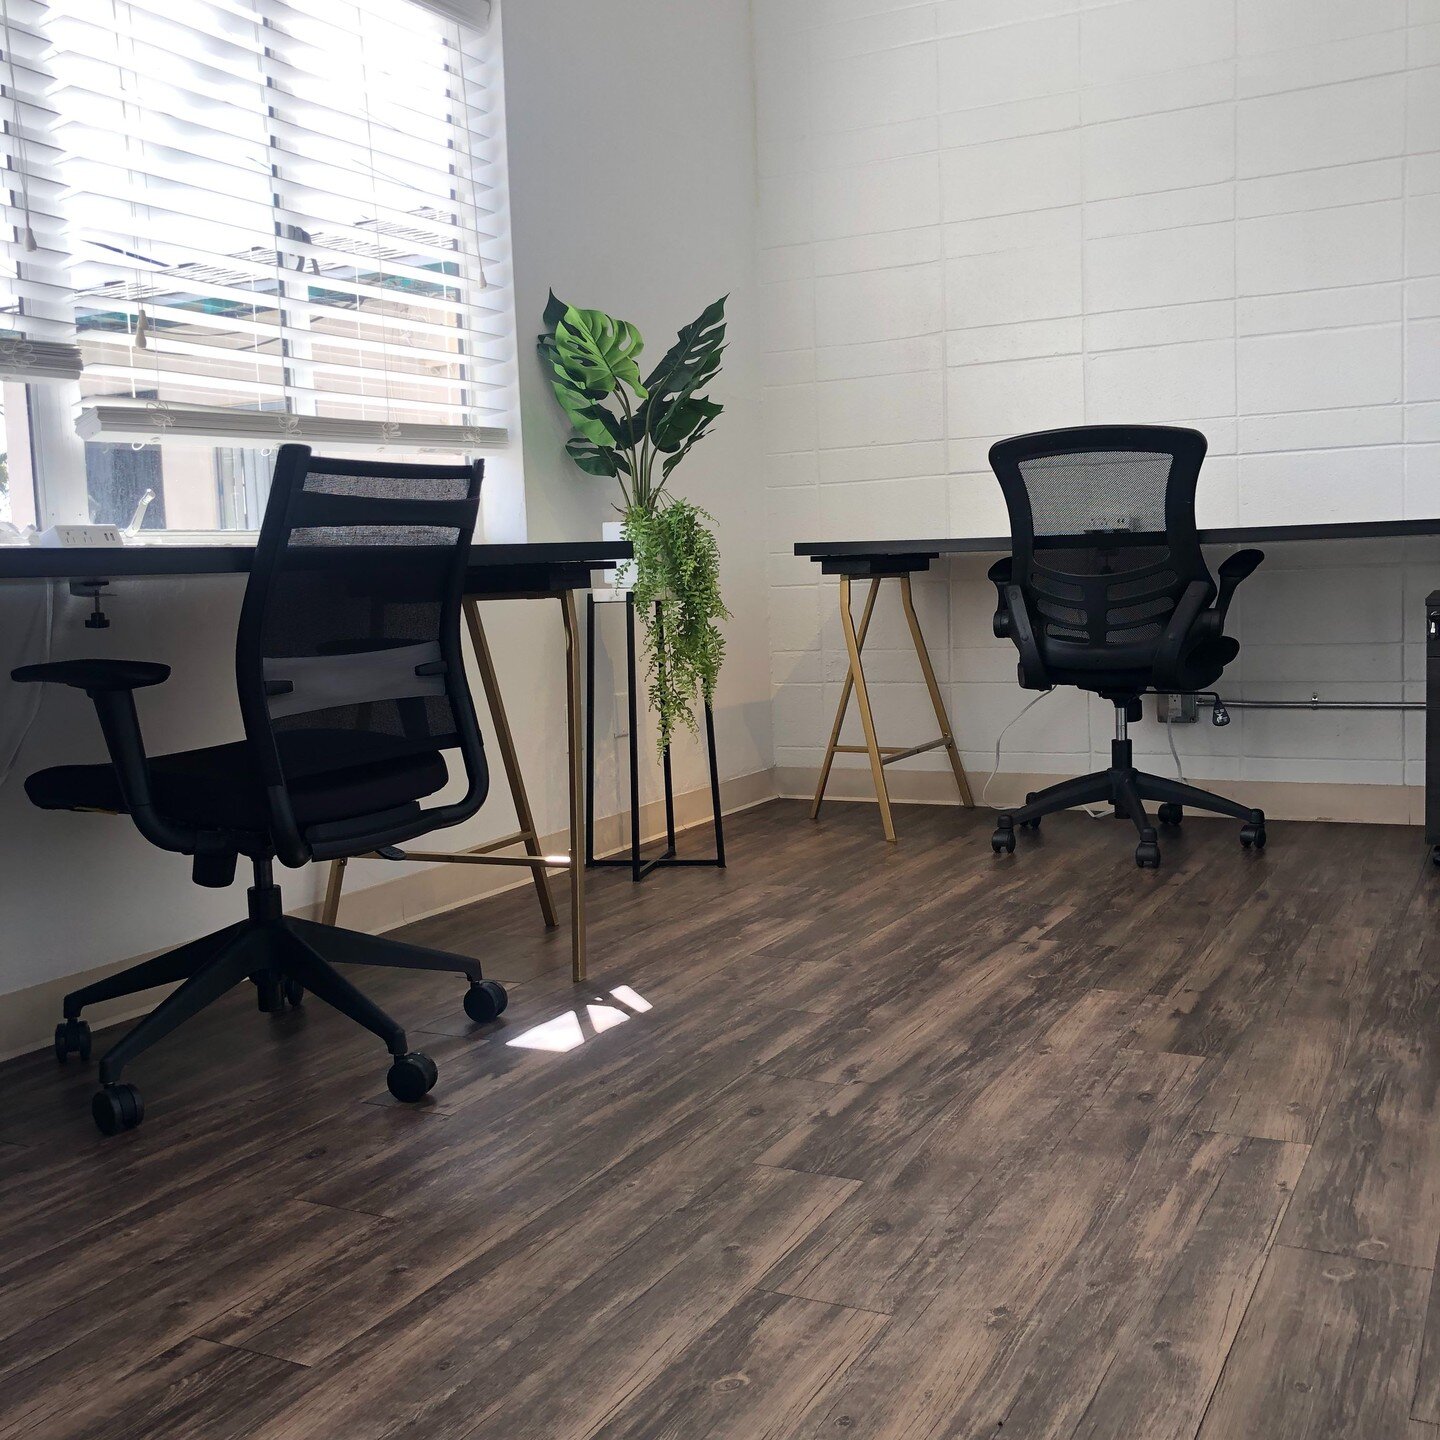 Available Now. A rare opportunity to get into a private office in the heart of North Park. 1-2 people, fully furnished, flexible terms, and amenities galore. Contact at https://www.hardihoodcowork.com/toursignup #coworking #cowork #coworkingspace #co